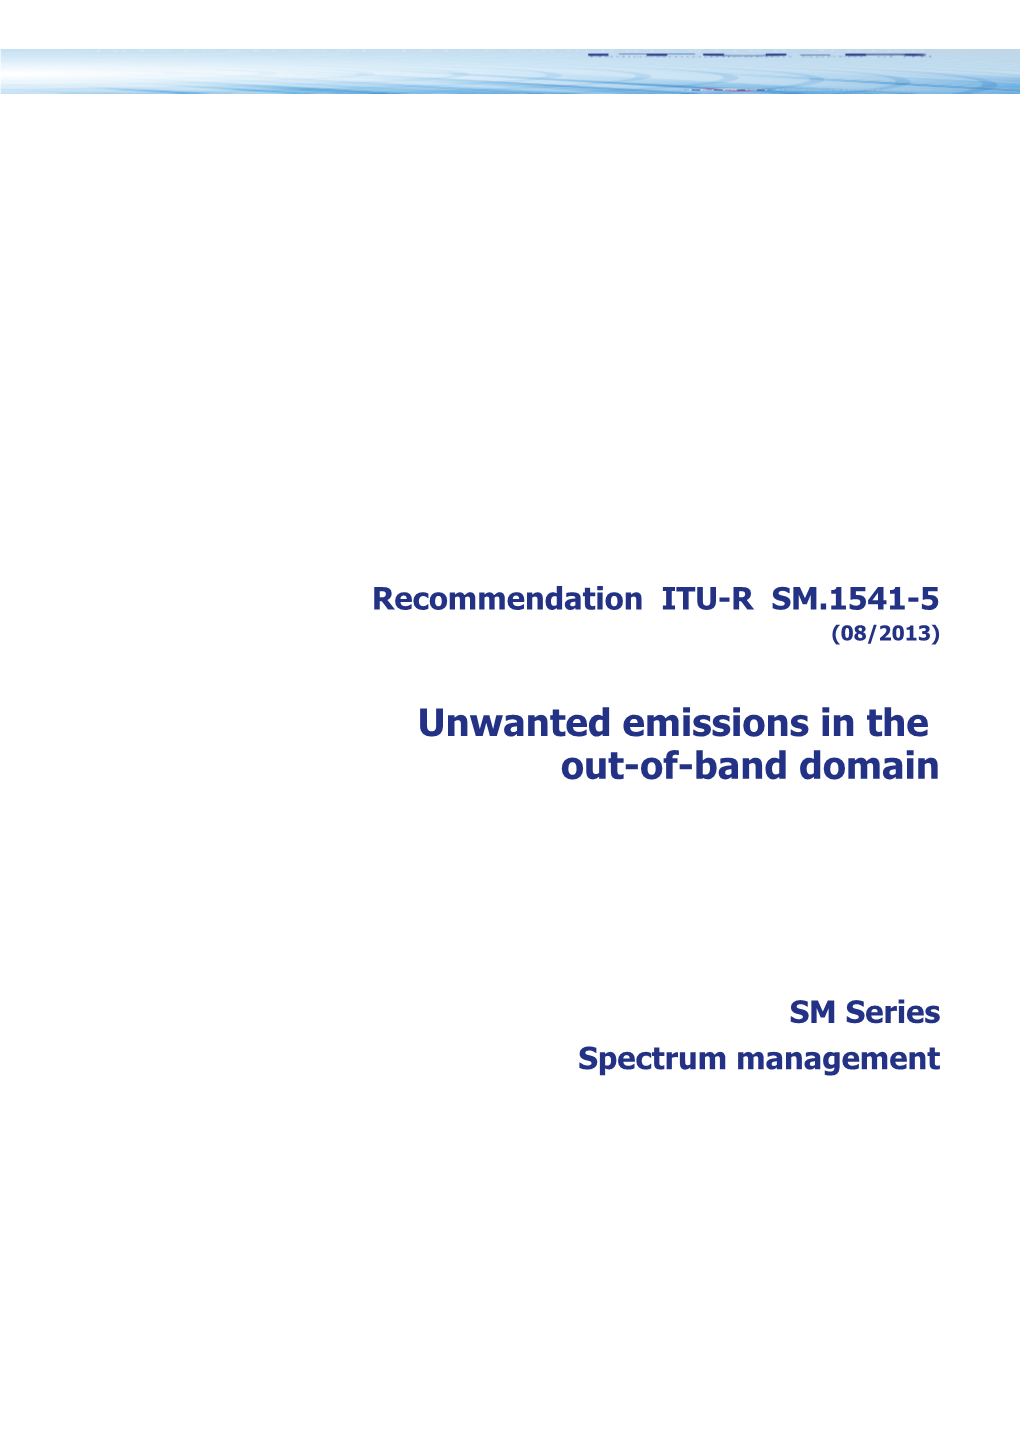 RECOMMENDATION ITU-R SM.1541-4* - Unwanted Emissions in the Out-Of-Band Domain